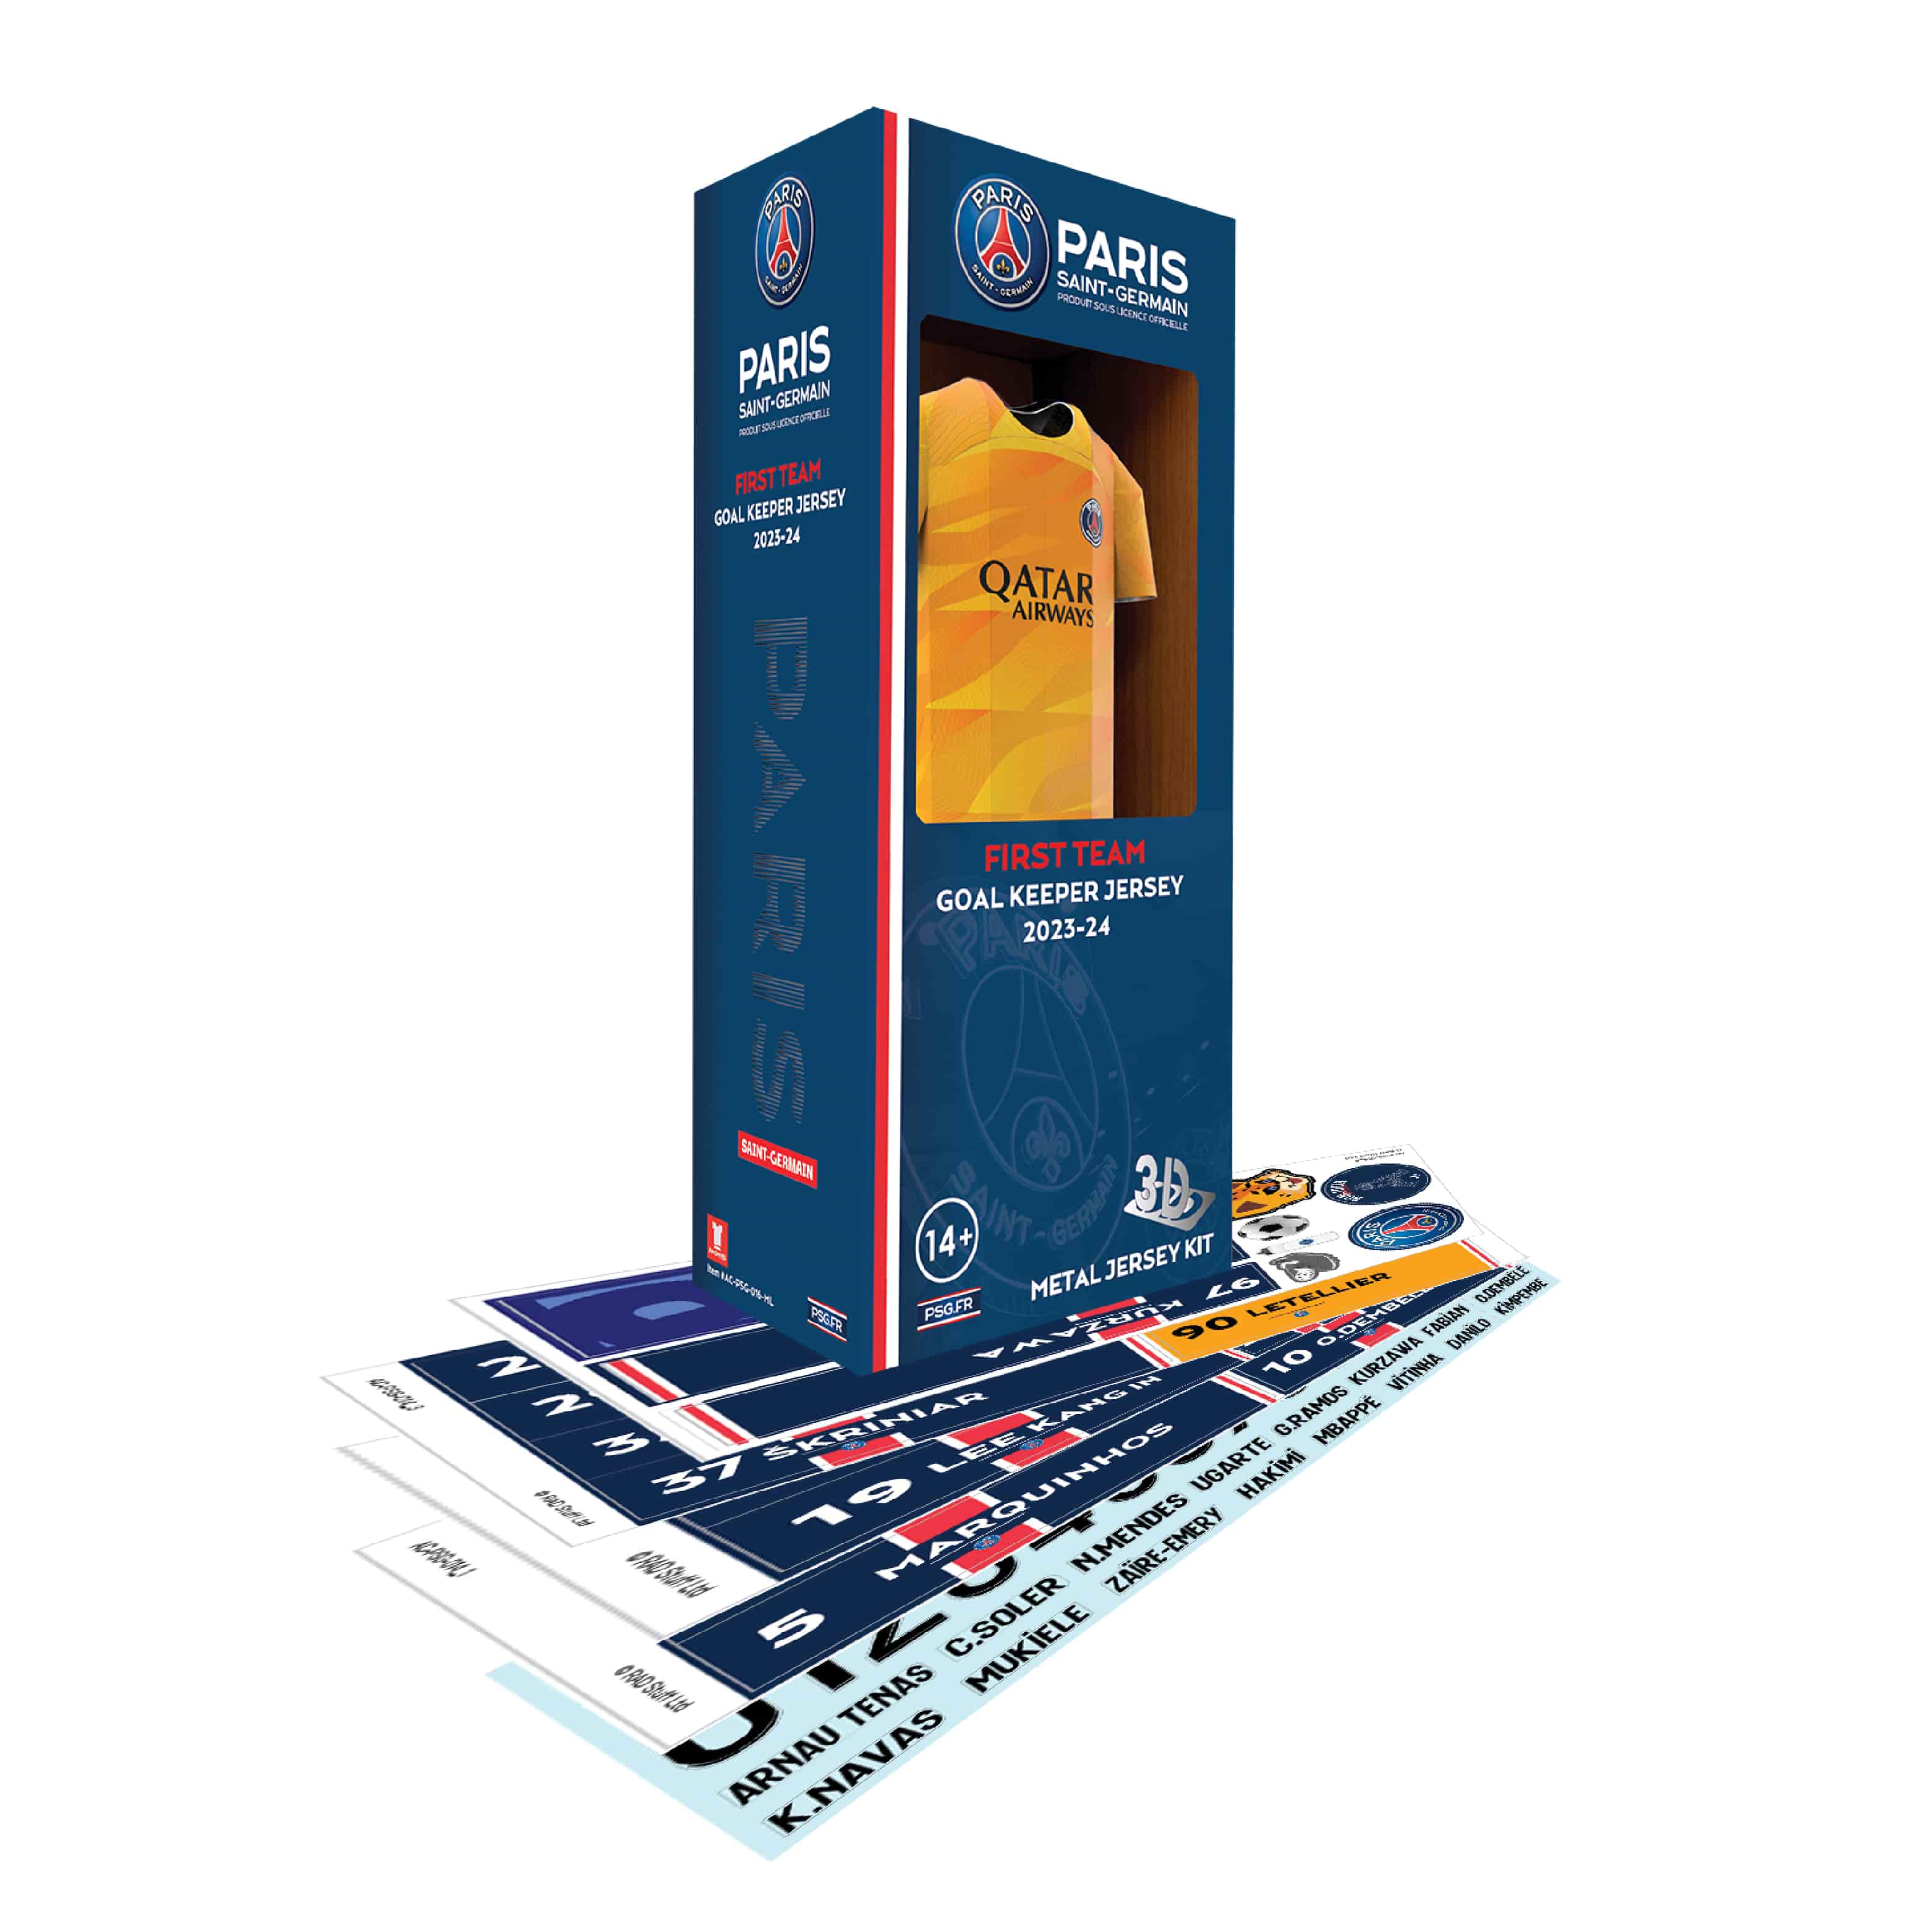 PSG Goalkeeper shirt with packaging